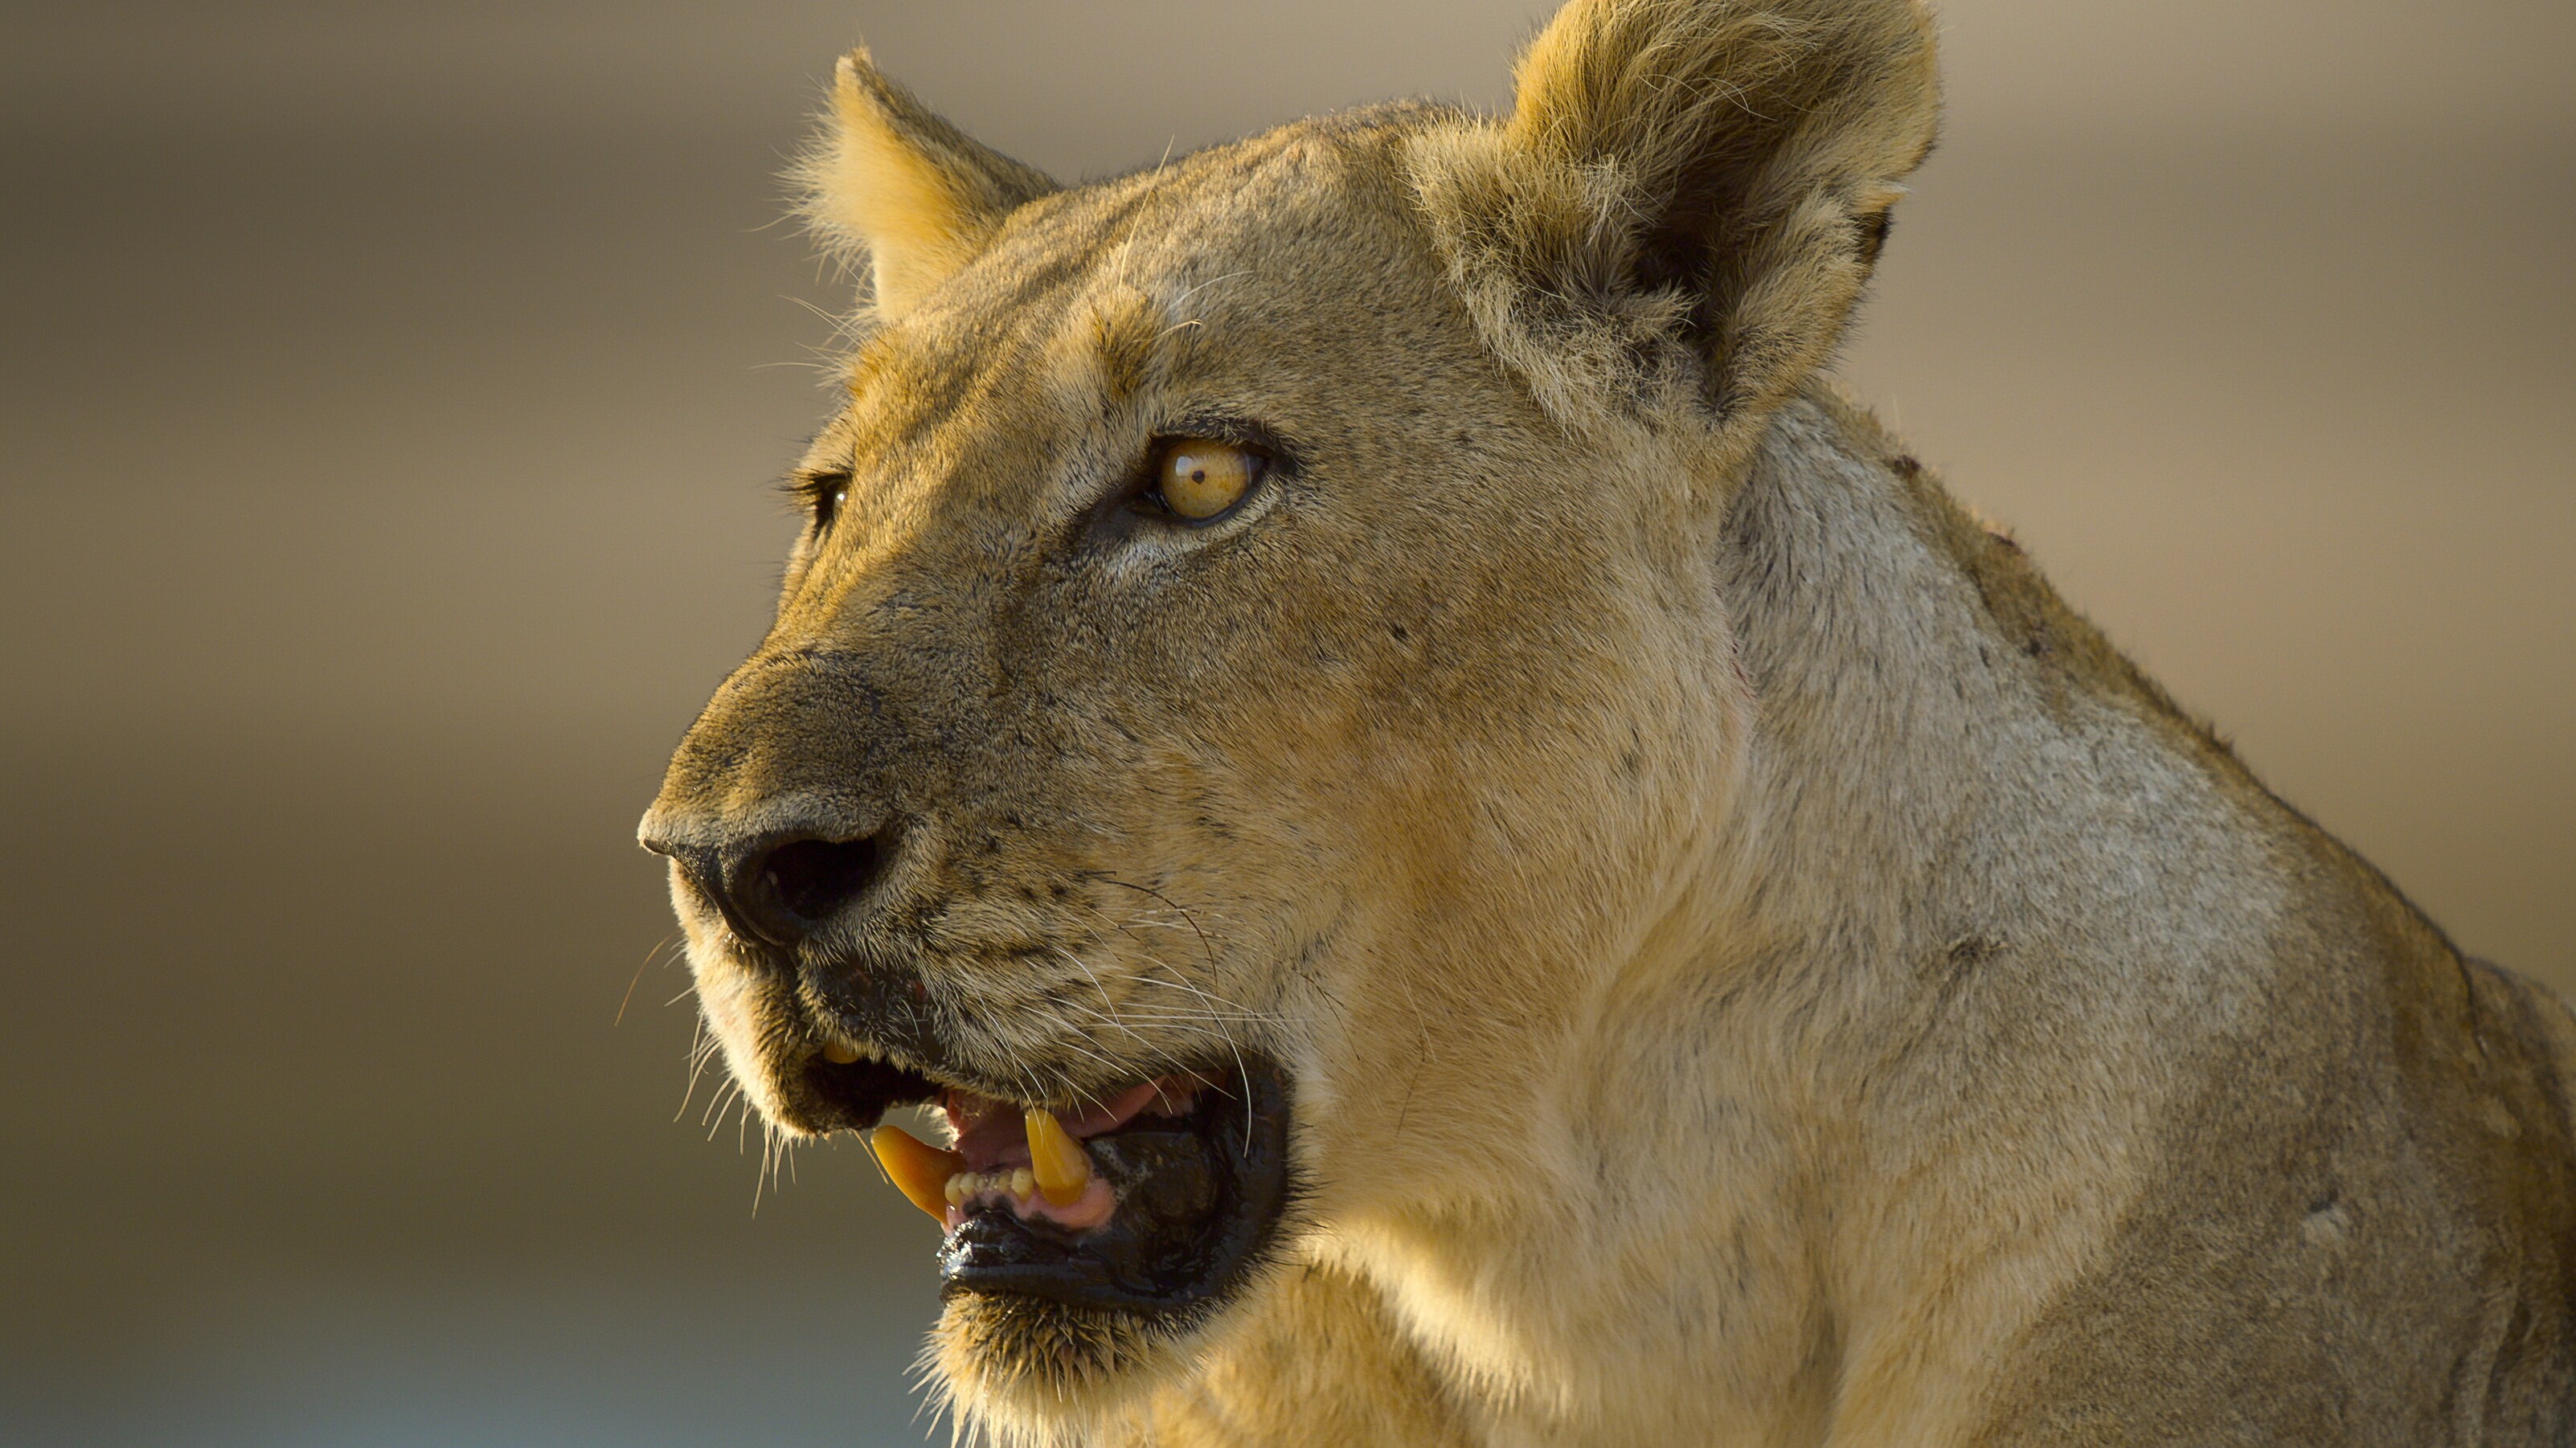 A powerful lioness. (Credit: National Geographic/Bertie Gregory for Disney+)